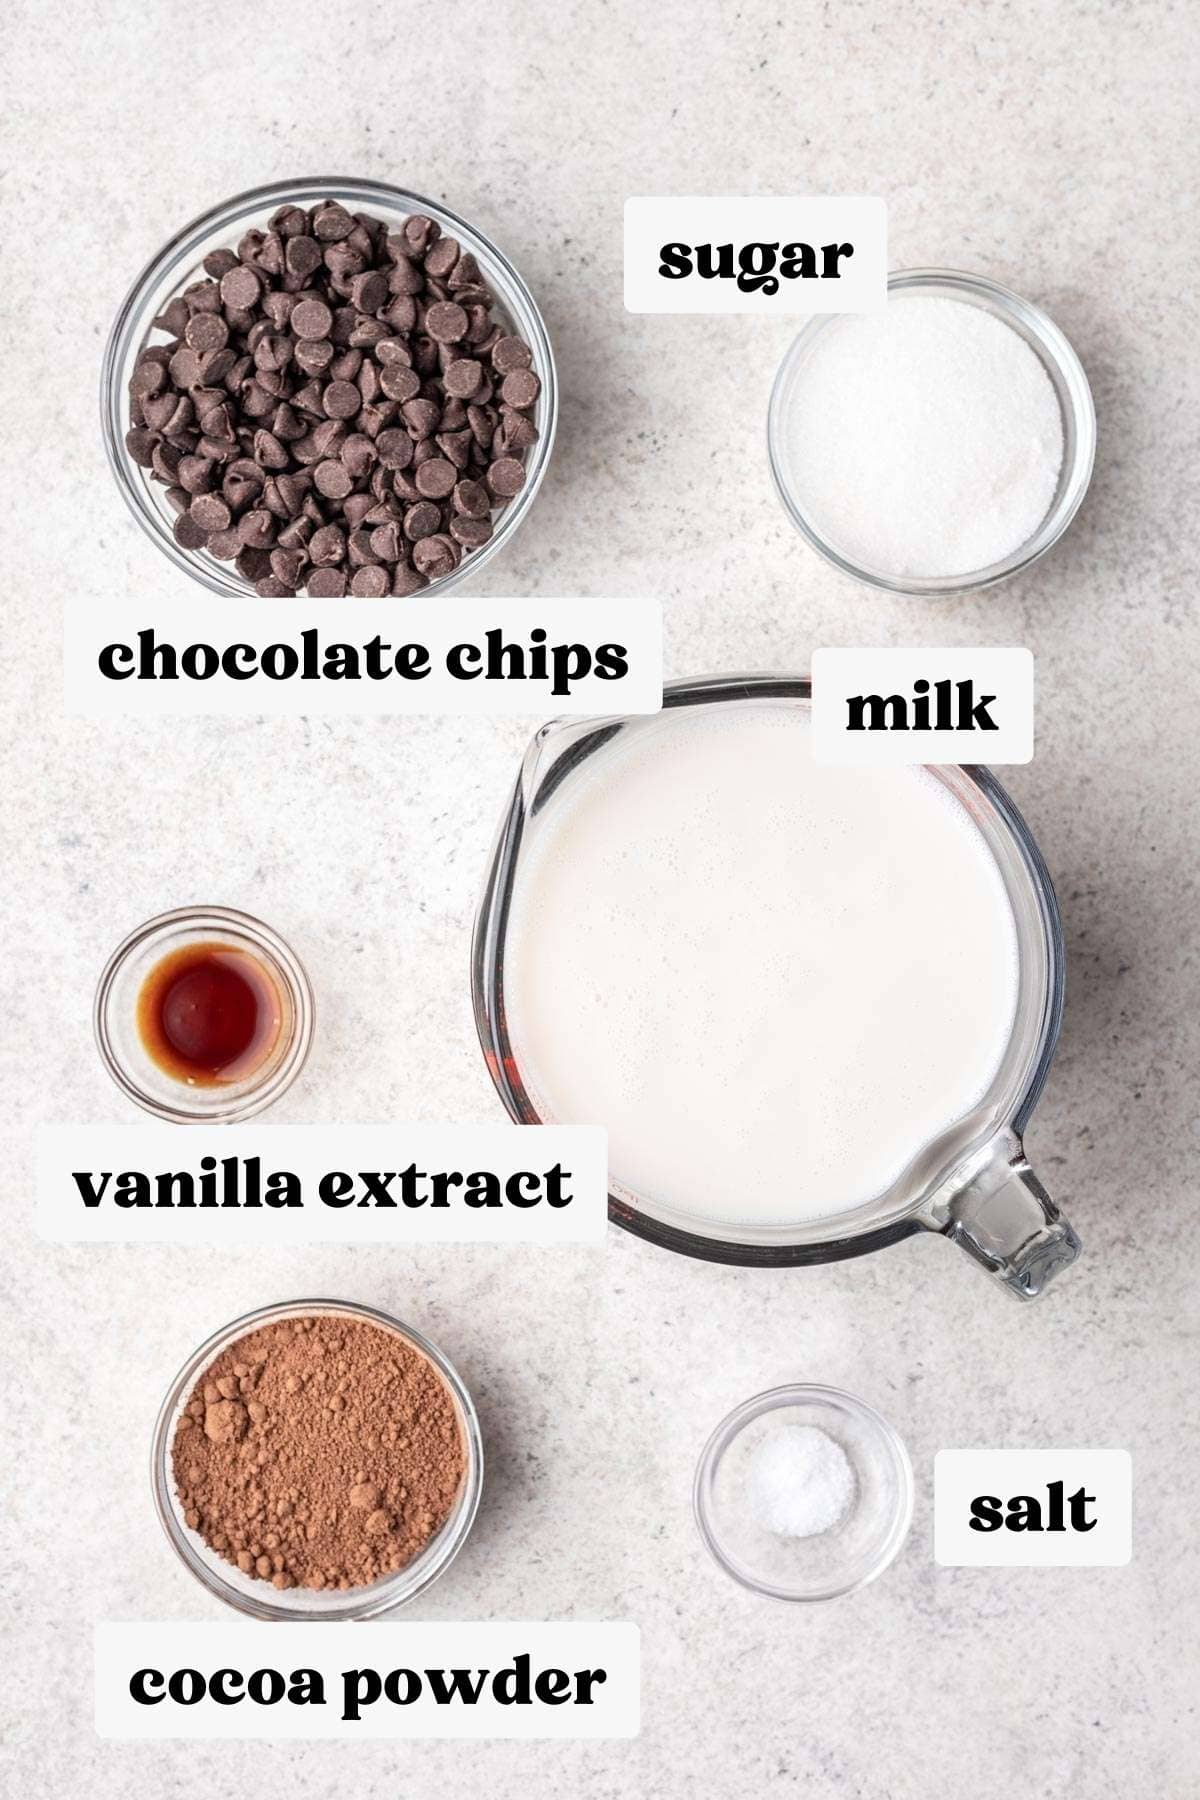 Ingredients you need for crockpot hot chocolate measured and labeled.